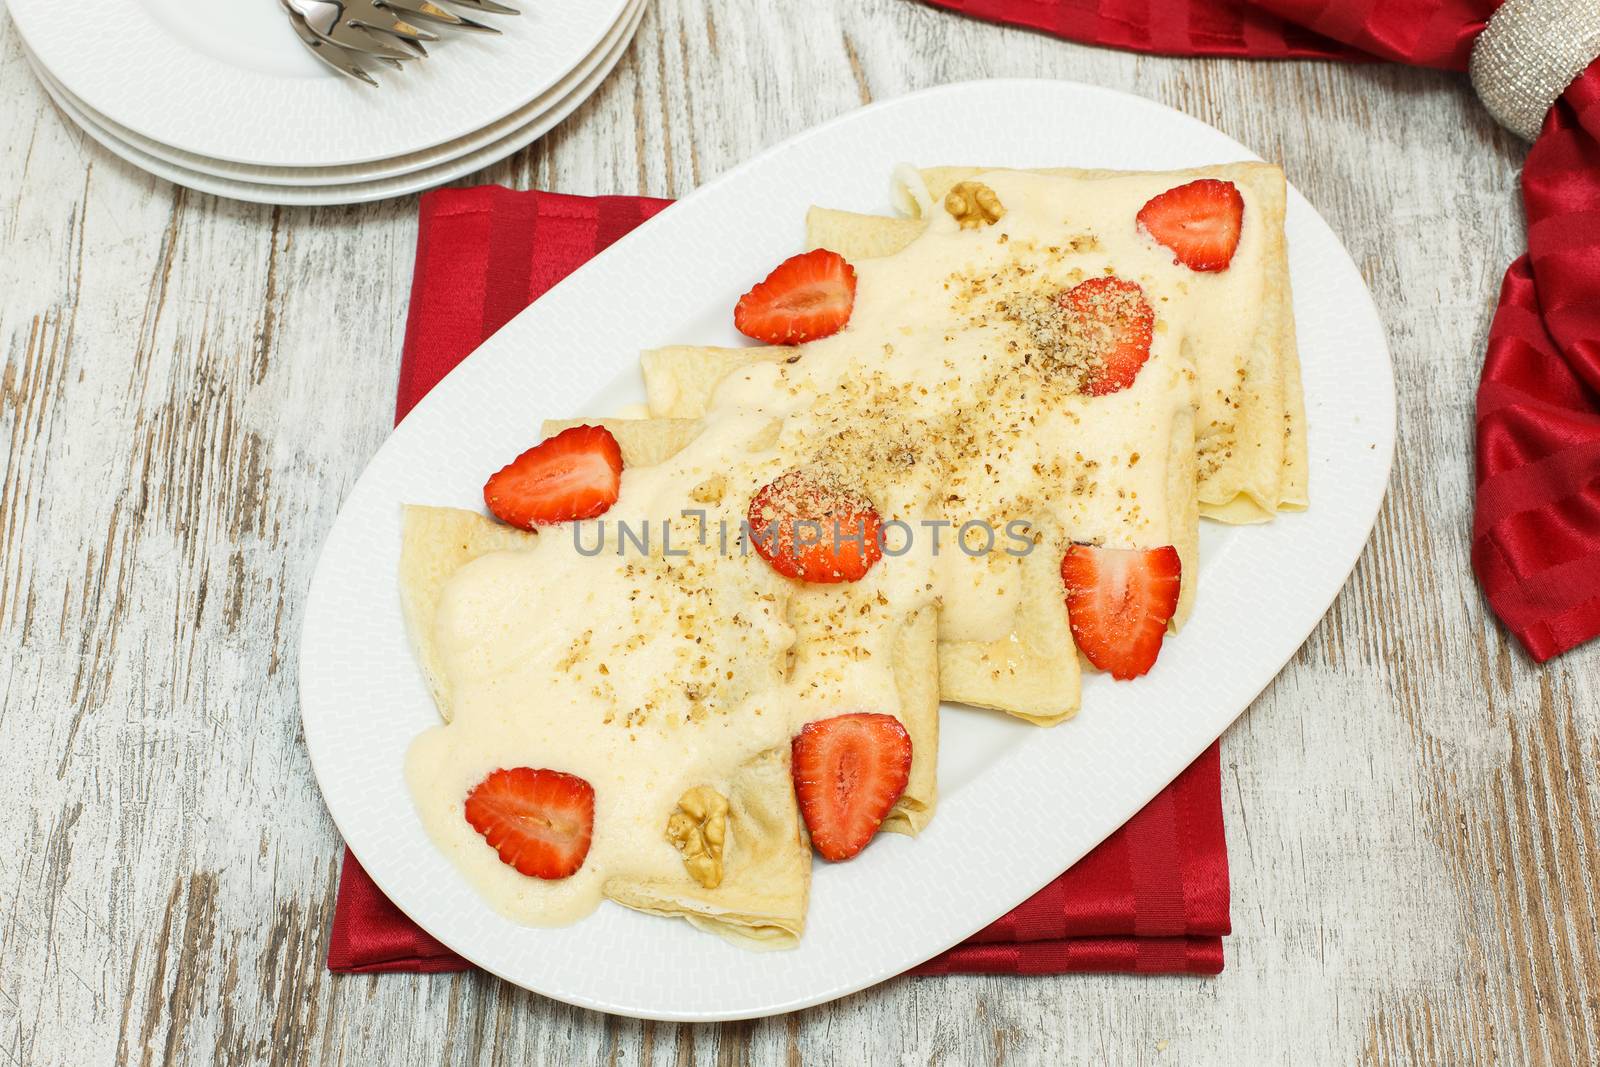 Crepes with honey, strawberries and walnuts. by Slast20